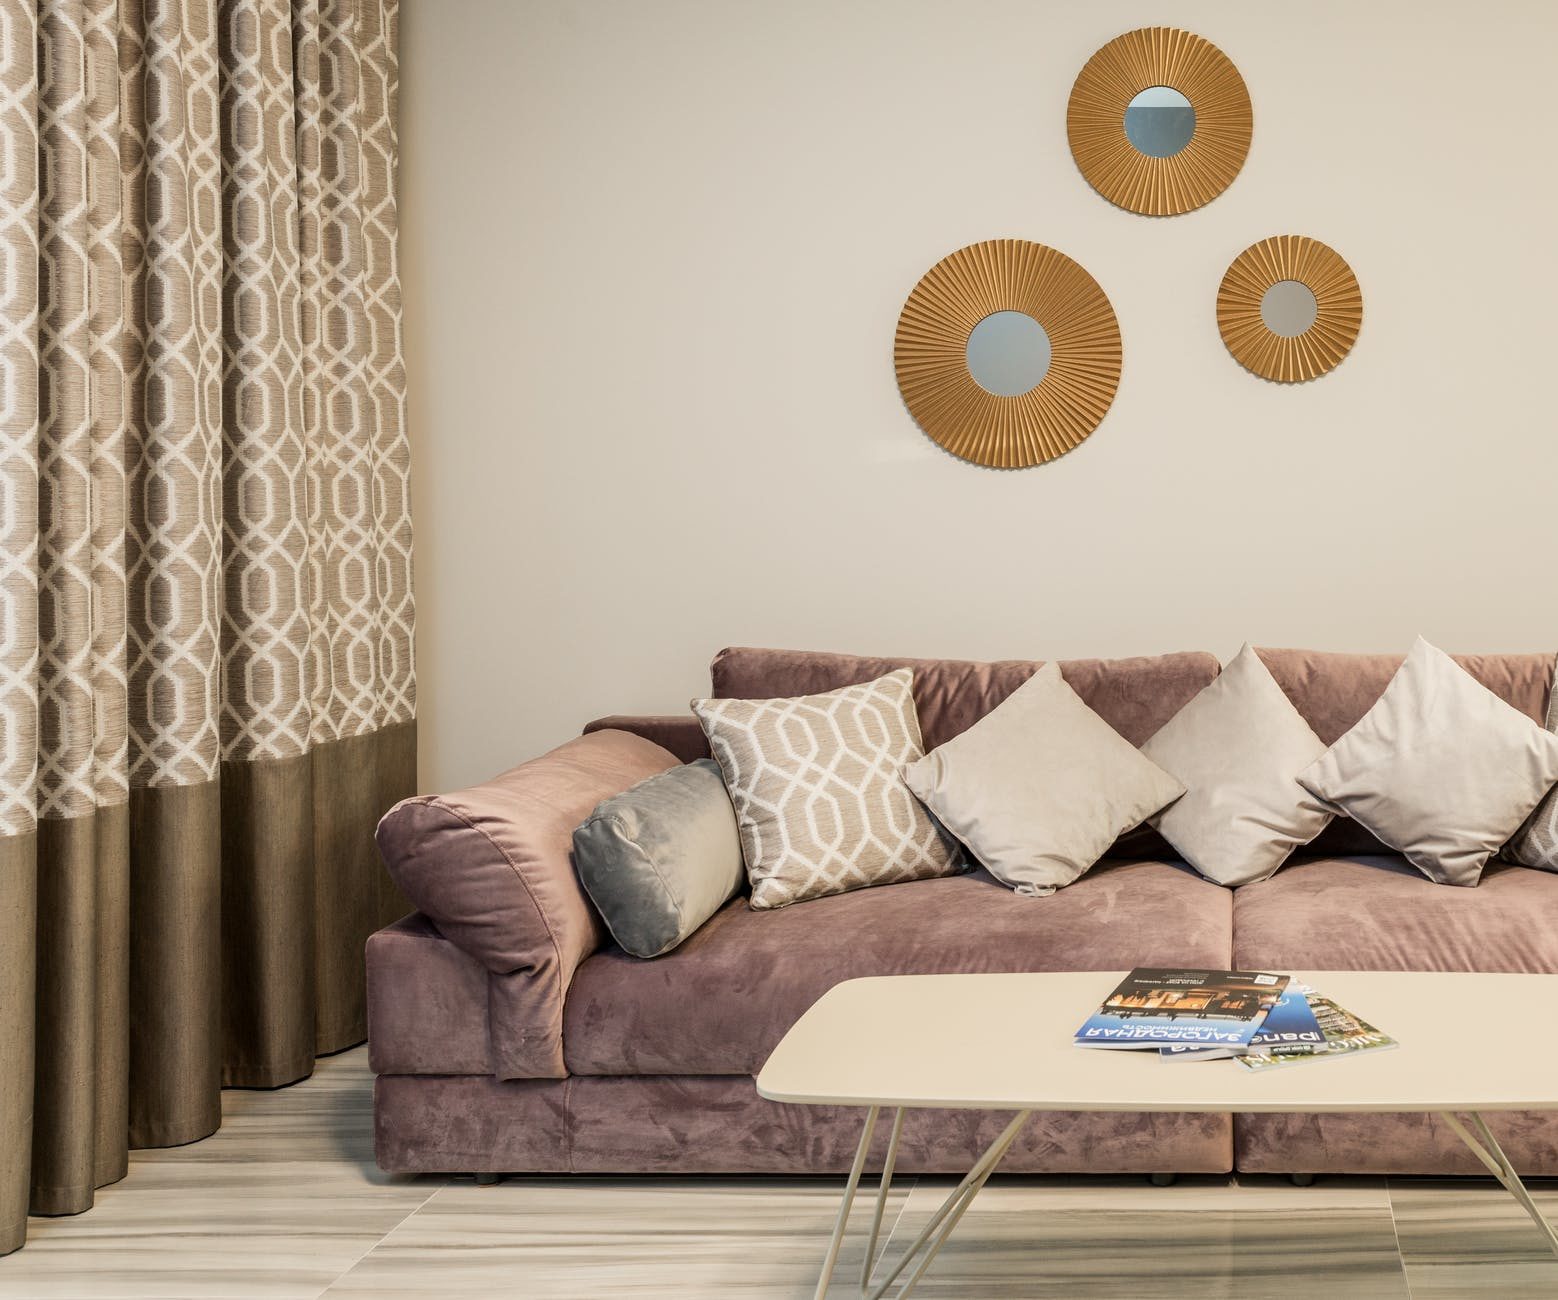 soft couch with pillows at wall decorated with mirrors